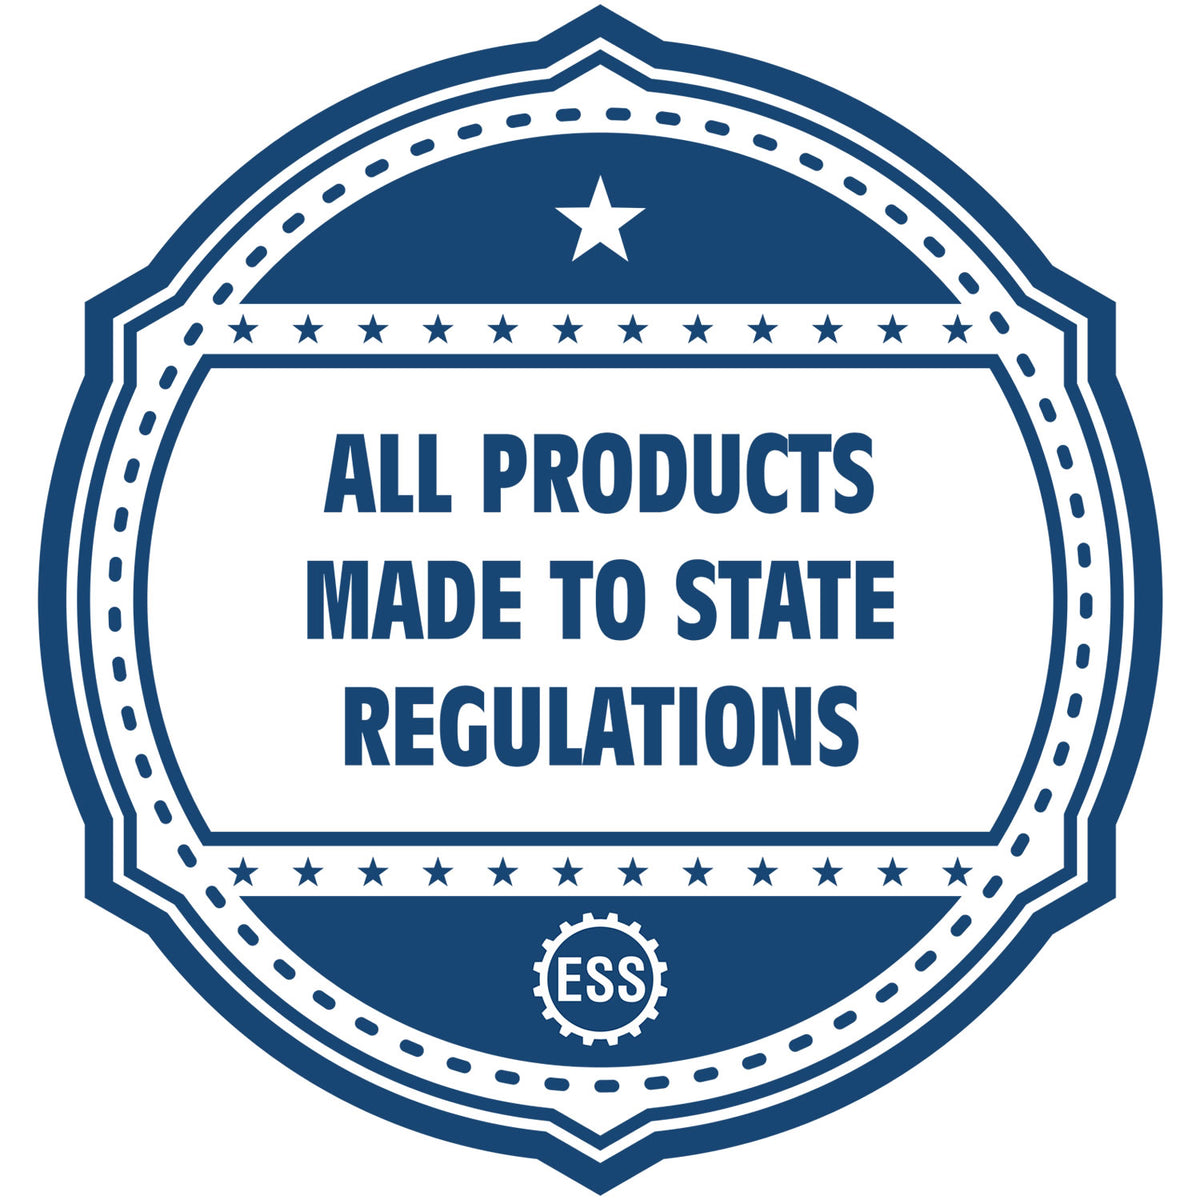 An icon or badge element for the MaxLight Premium Pre-Inked Arizona State Seal Notarial Stamp showing that this product is made in compliance with state regulations.